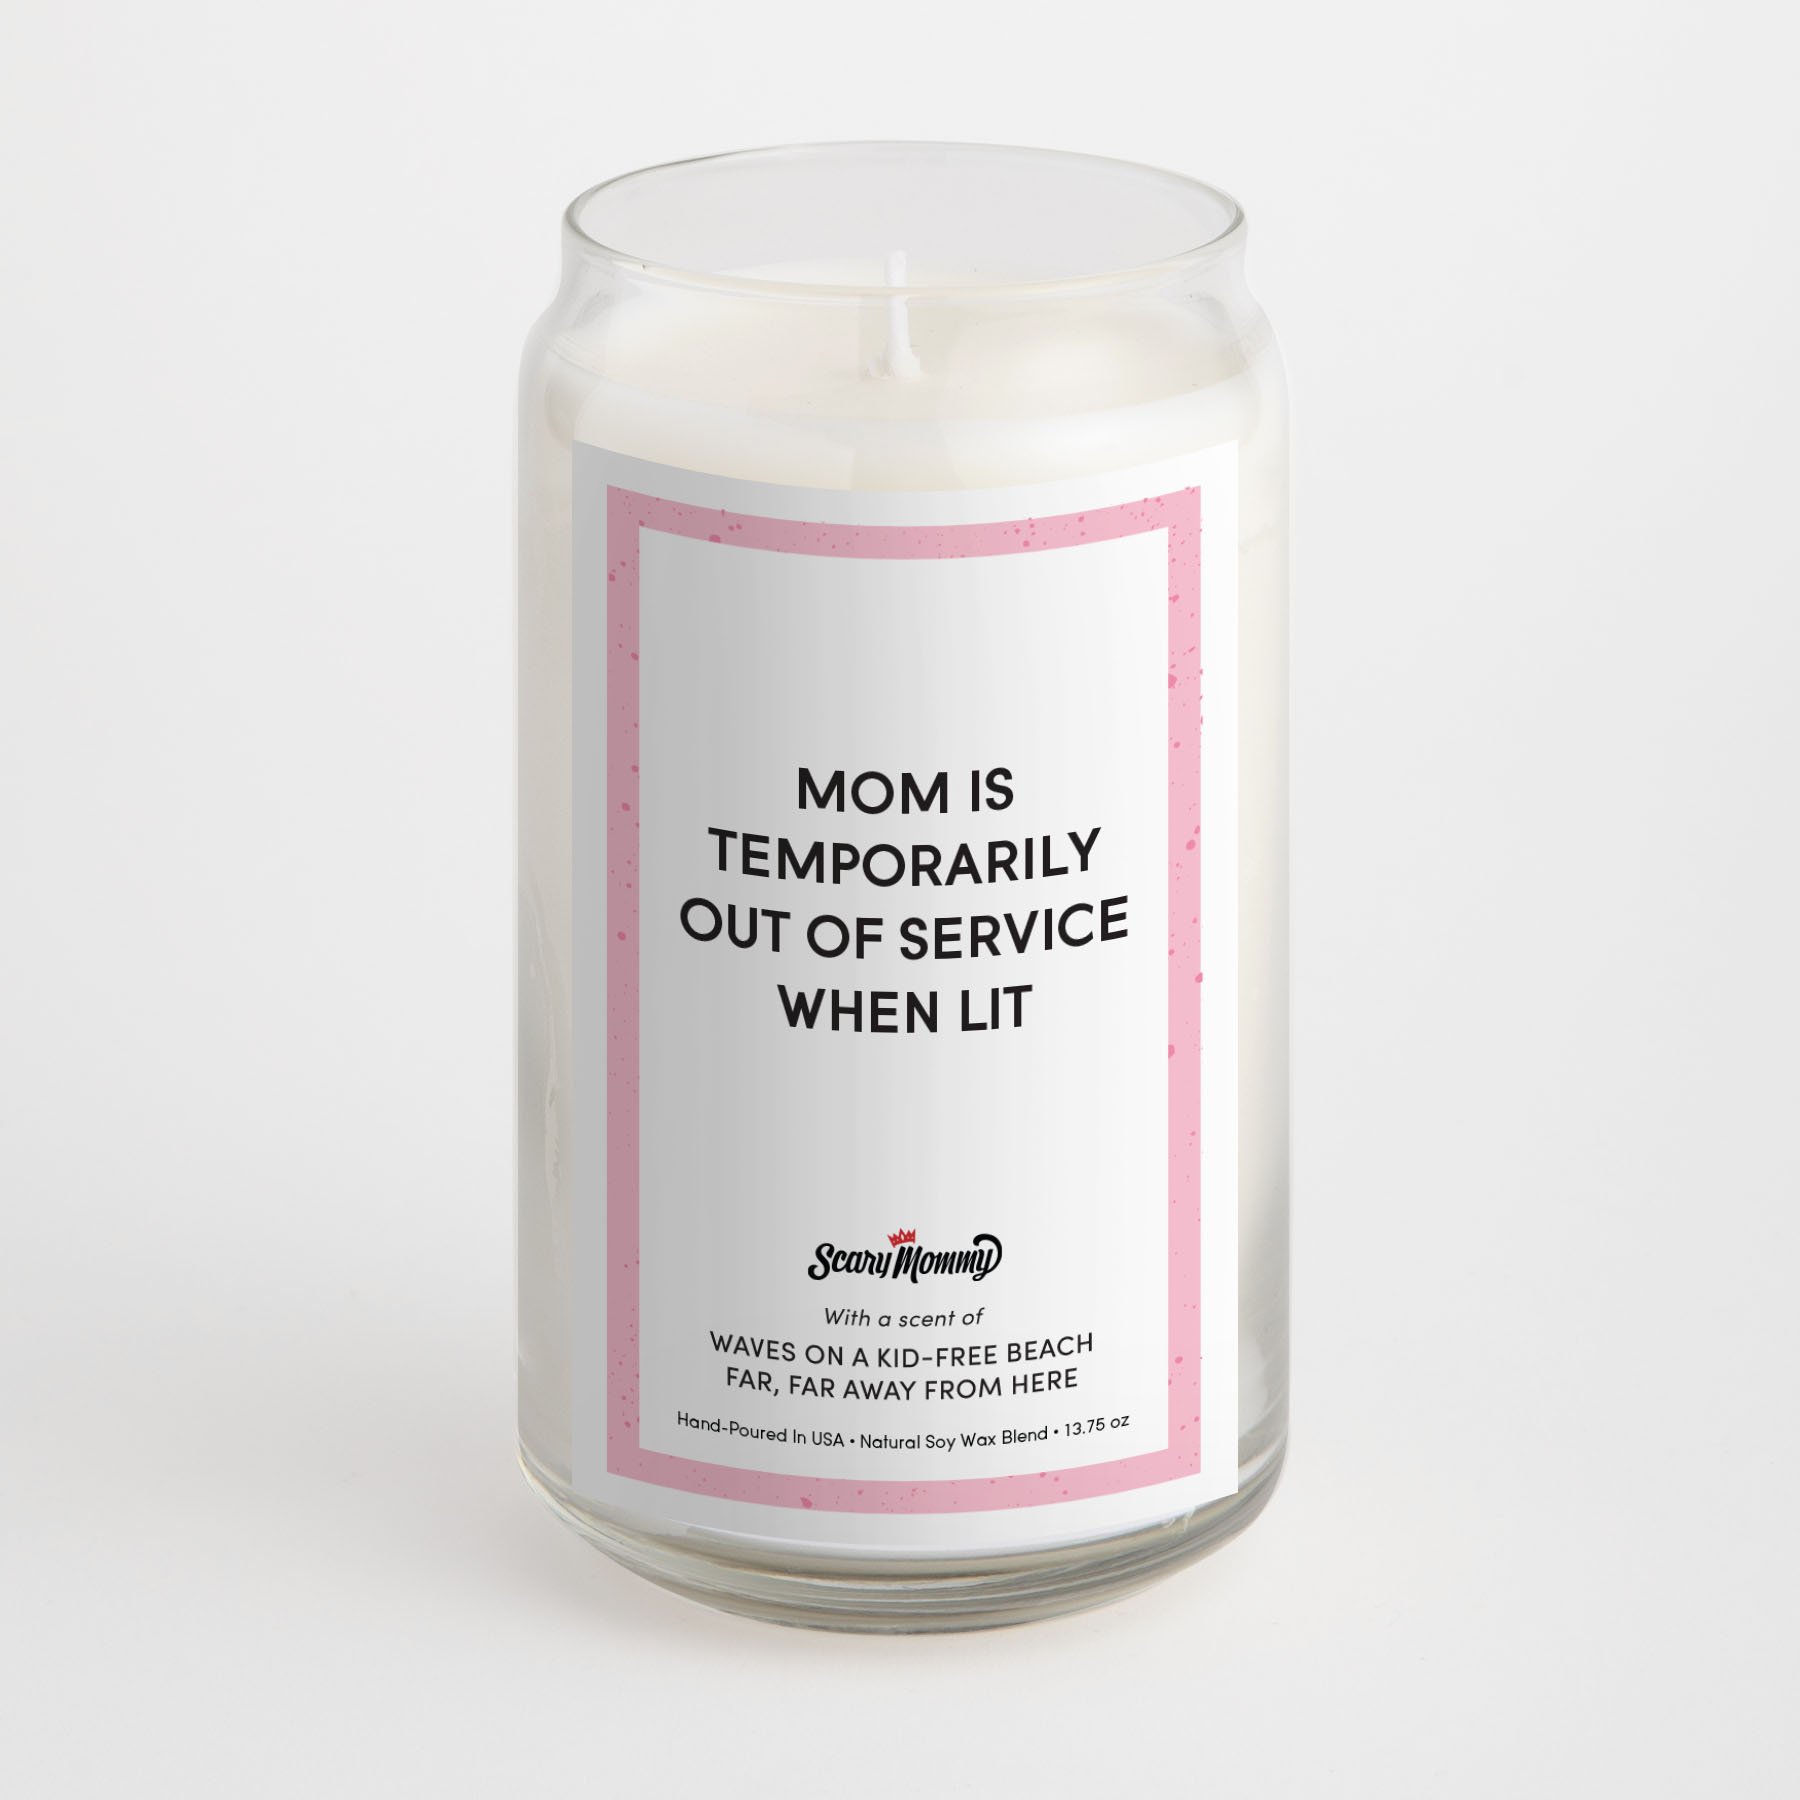 https://www.thedad.com/wp-content/uploads/2020/04/Candle.jpg